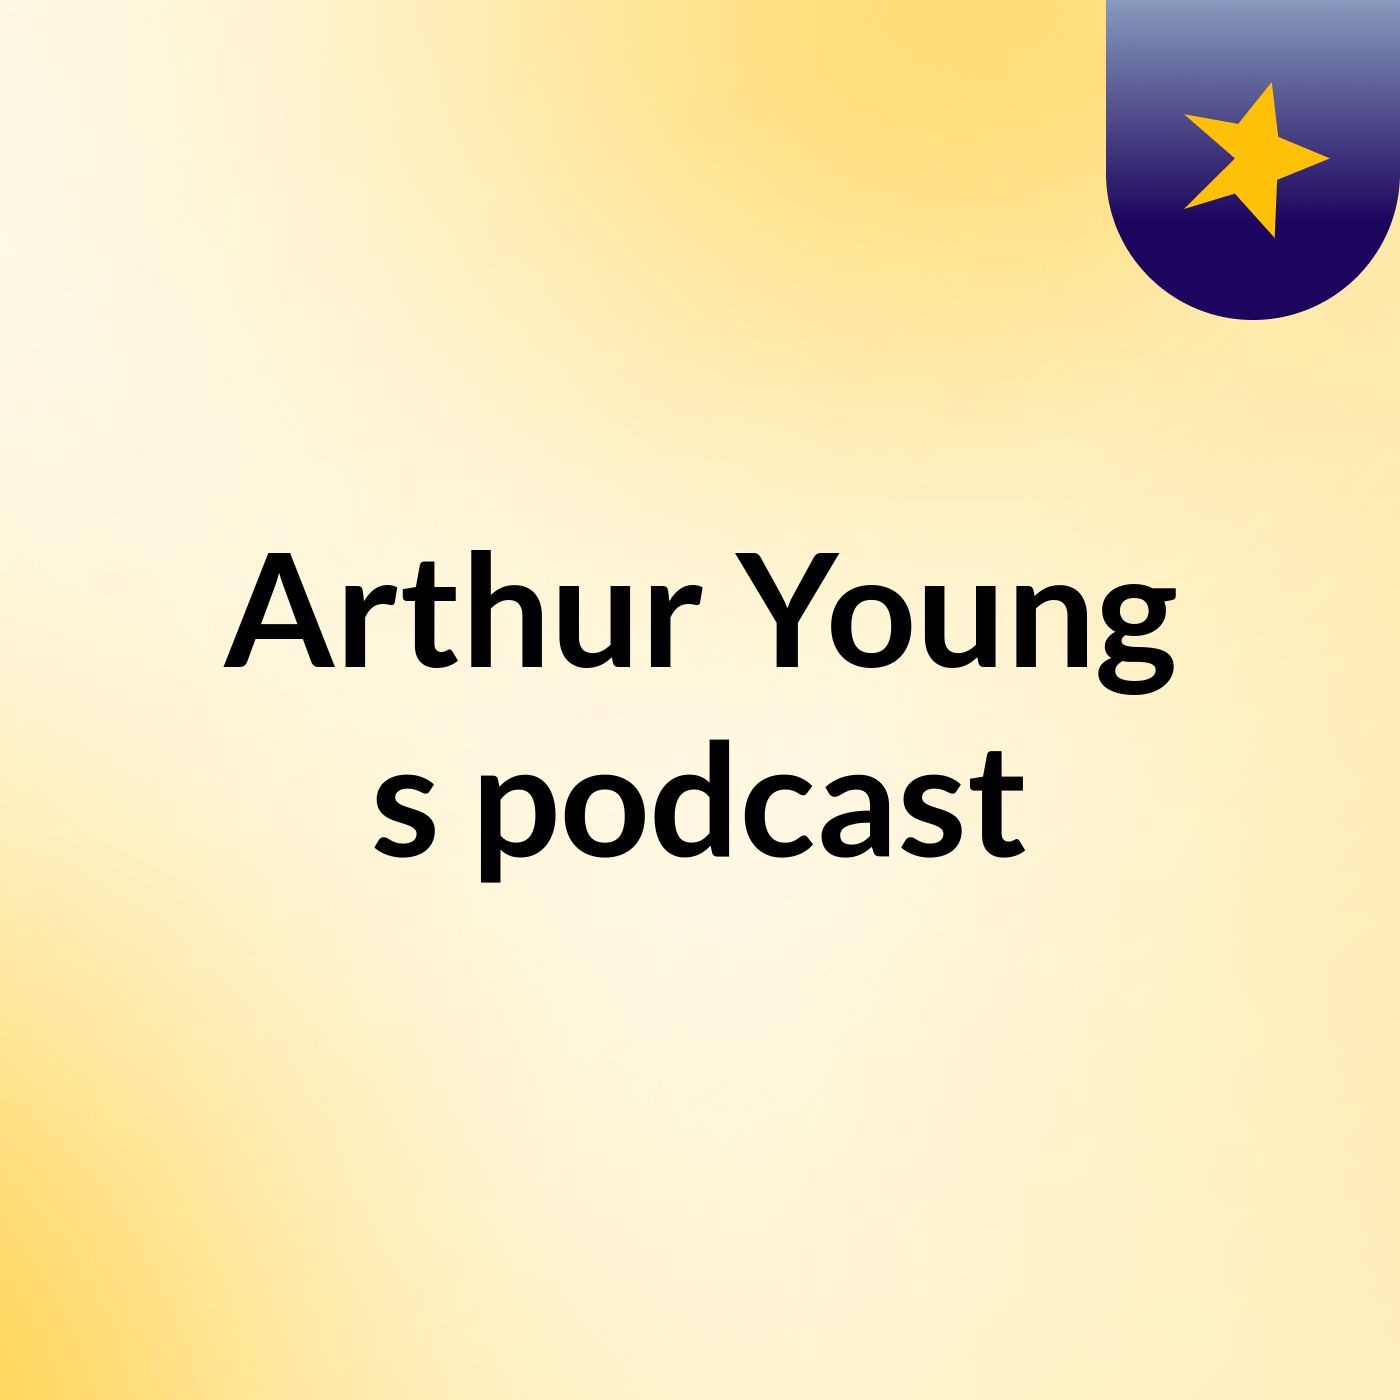 Arthur Young's podcast